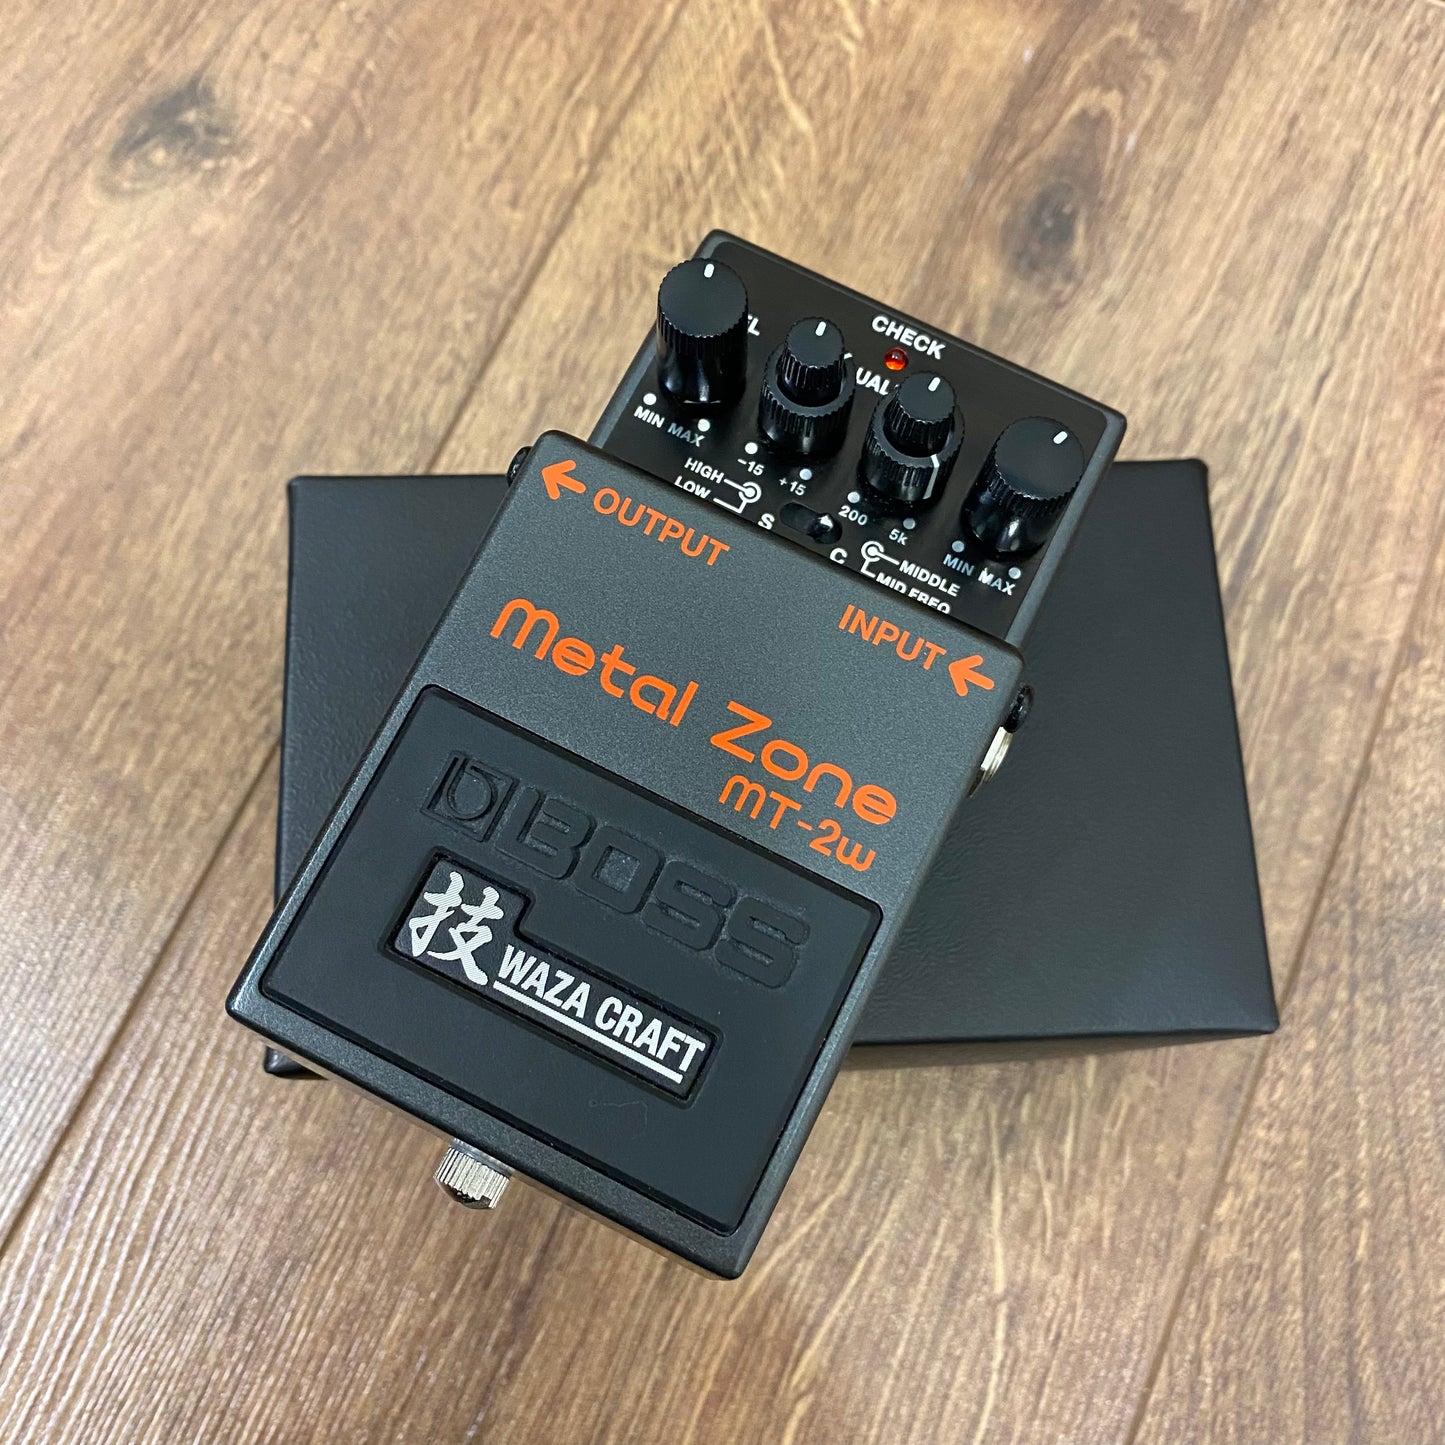 Pre-Owned Boss MT-2W Metal Zone Waza Craft Pedal